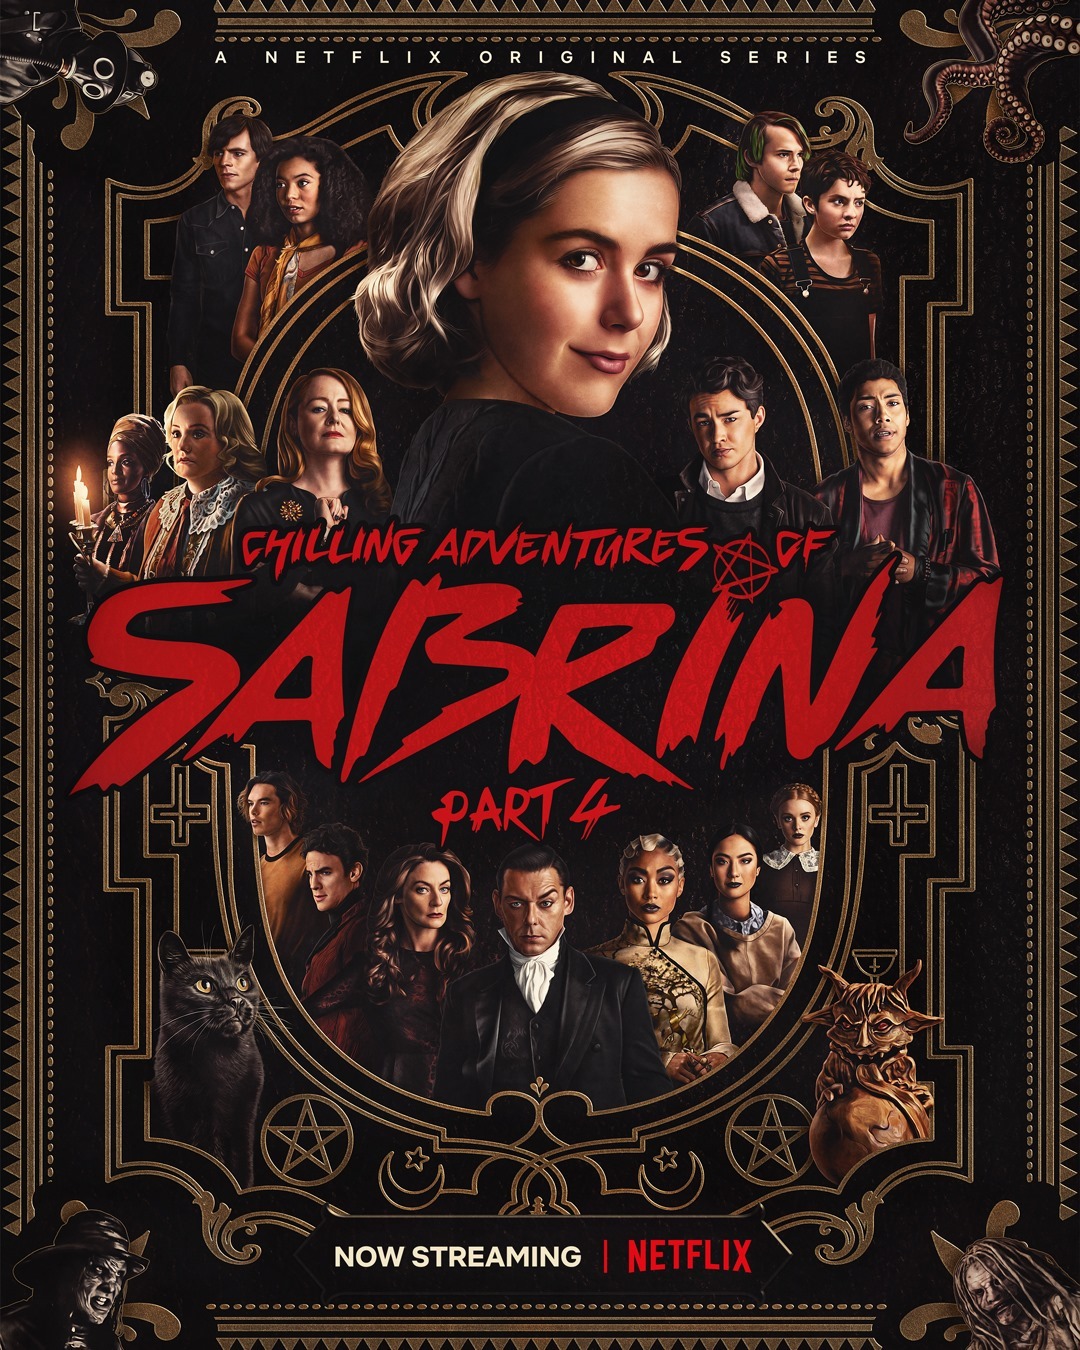 The Chilling Adventures of Sabrina - Horror Webseries